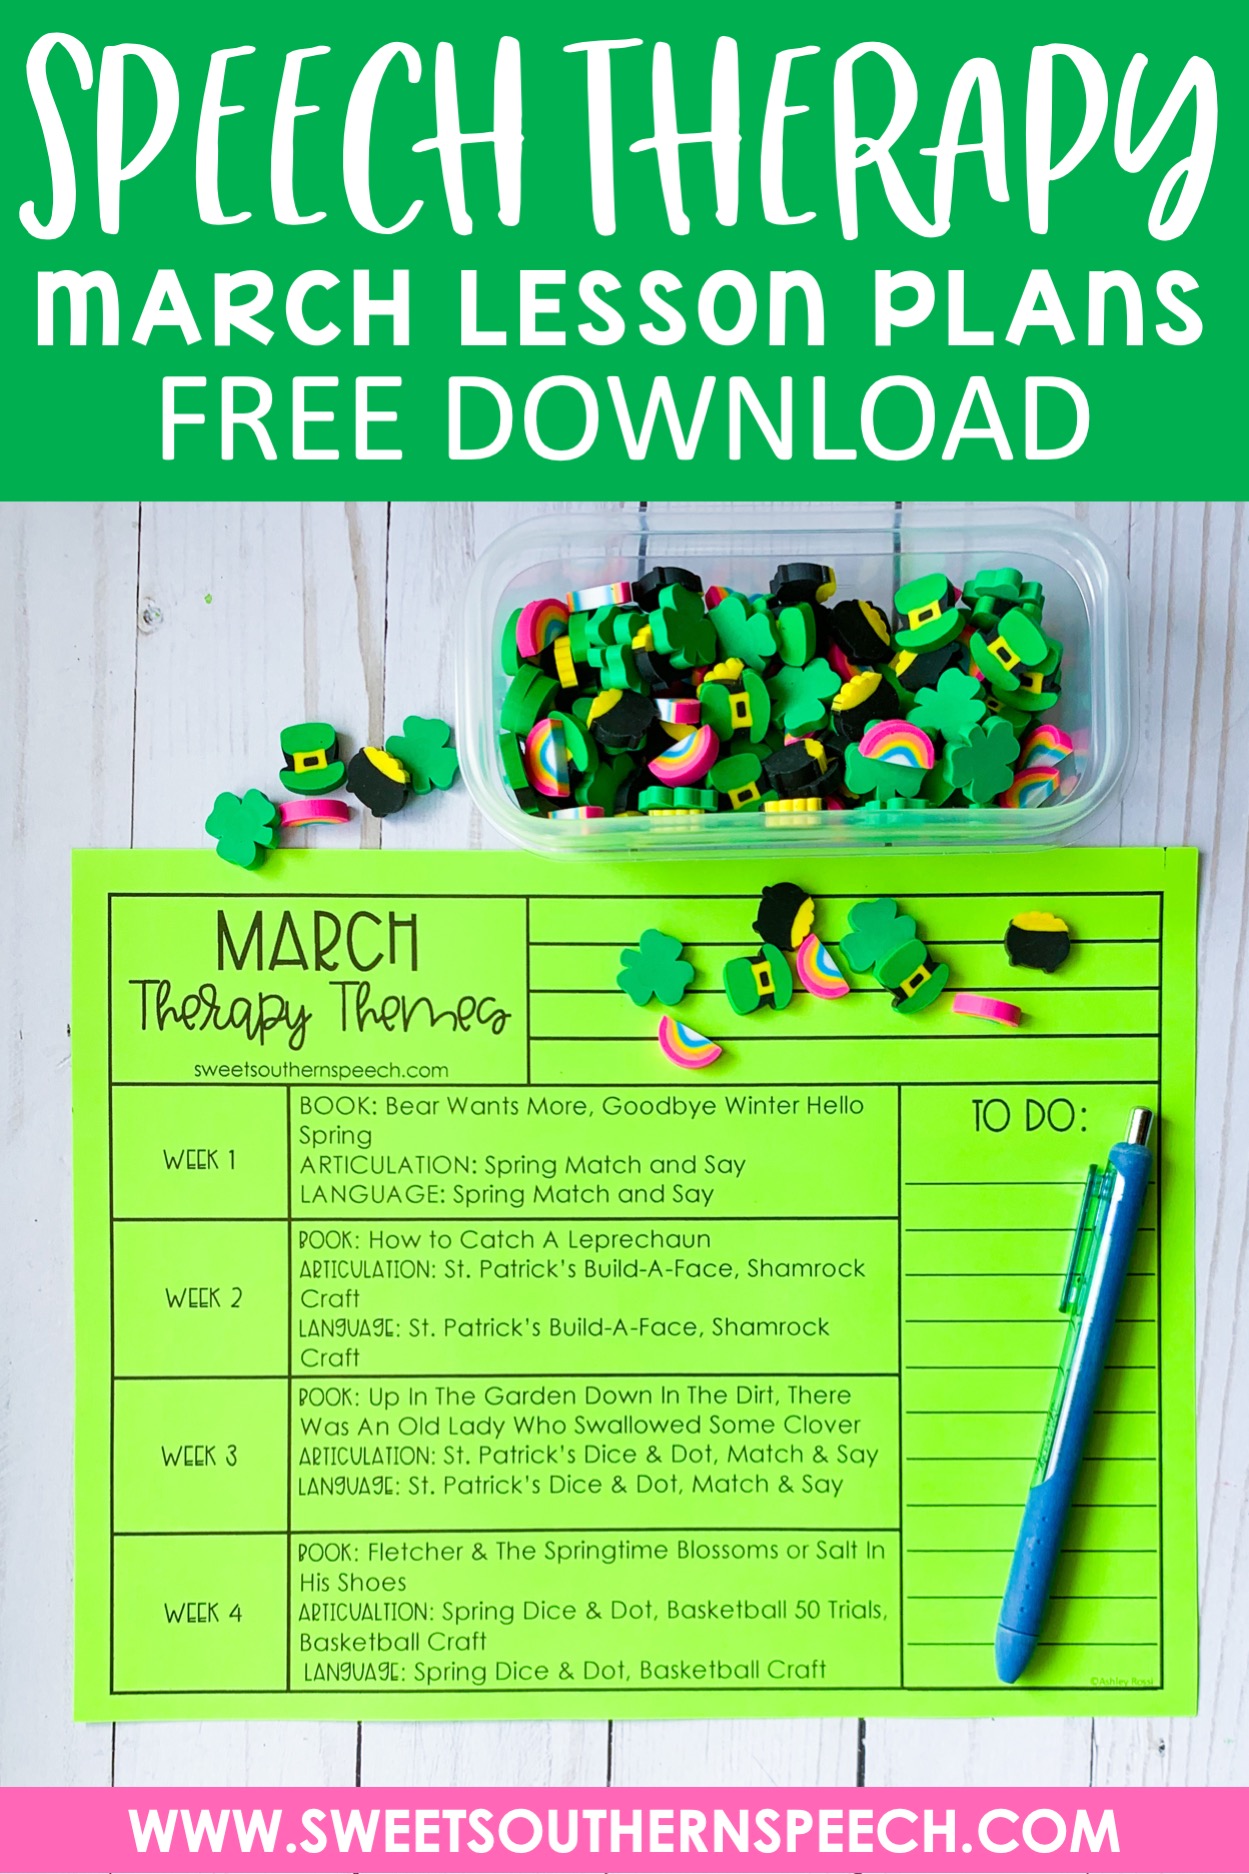 Free March Lesson Plans for Speech Therapy